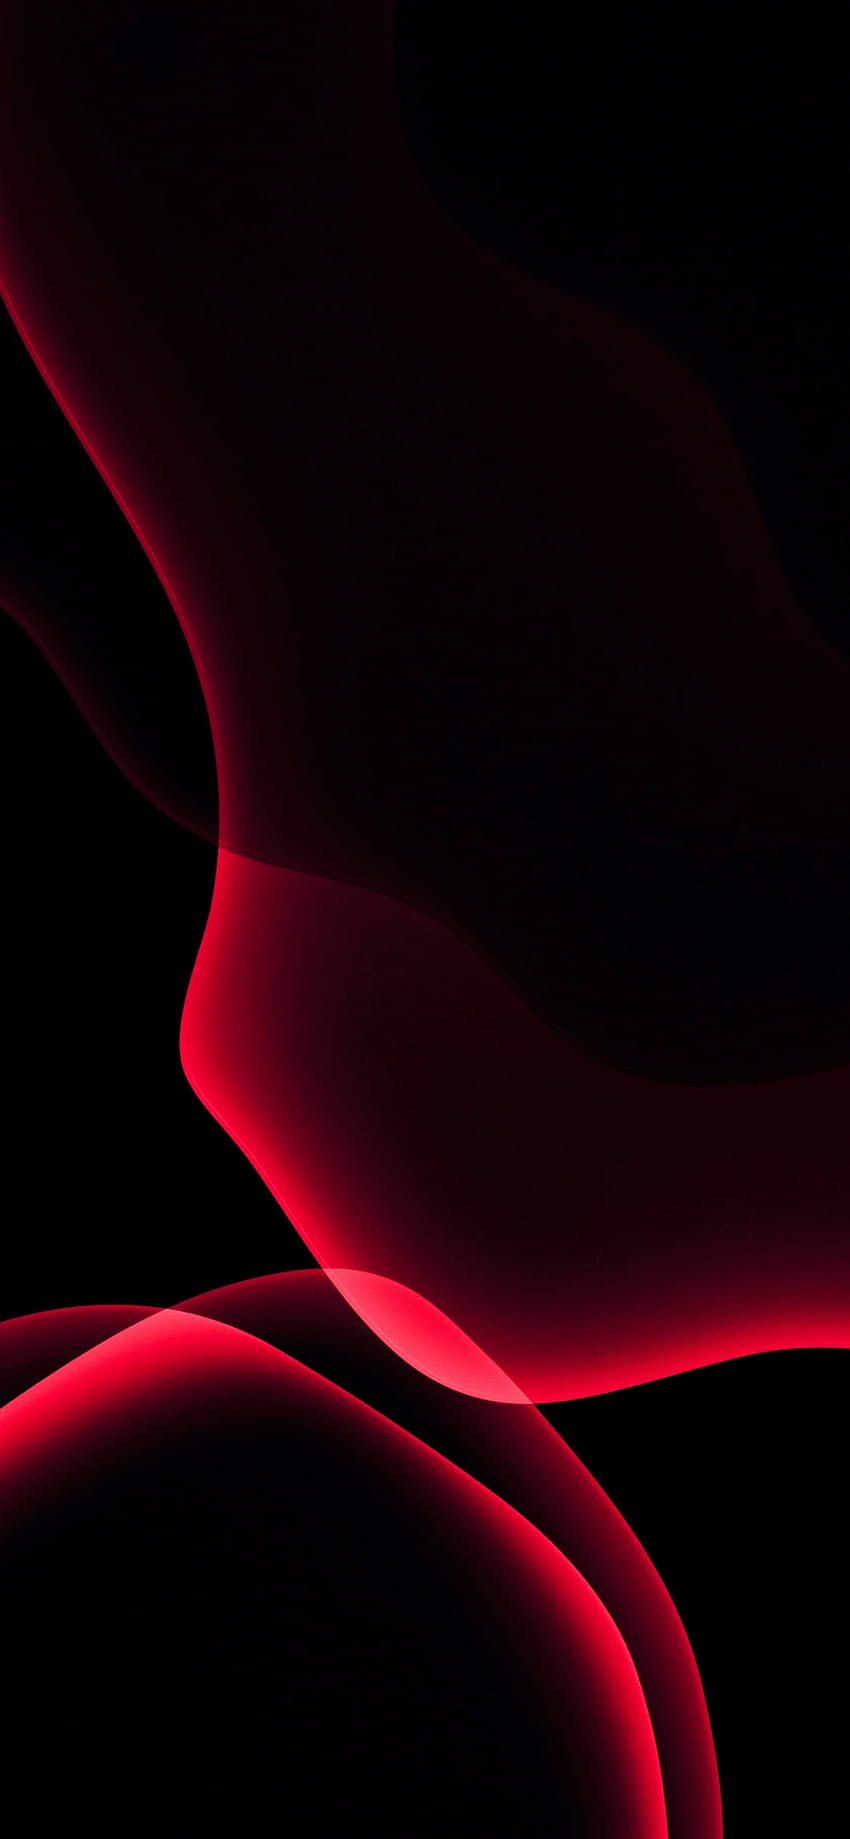 IOS 13 , Stock, iPadOS, Red, Black background, AMOLED, , Abstract ...